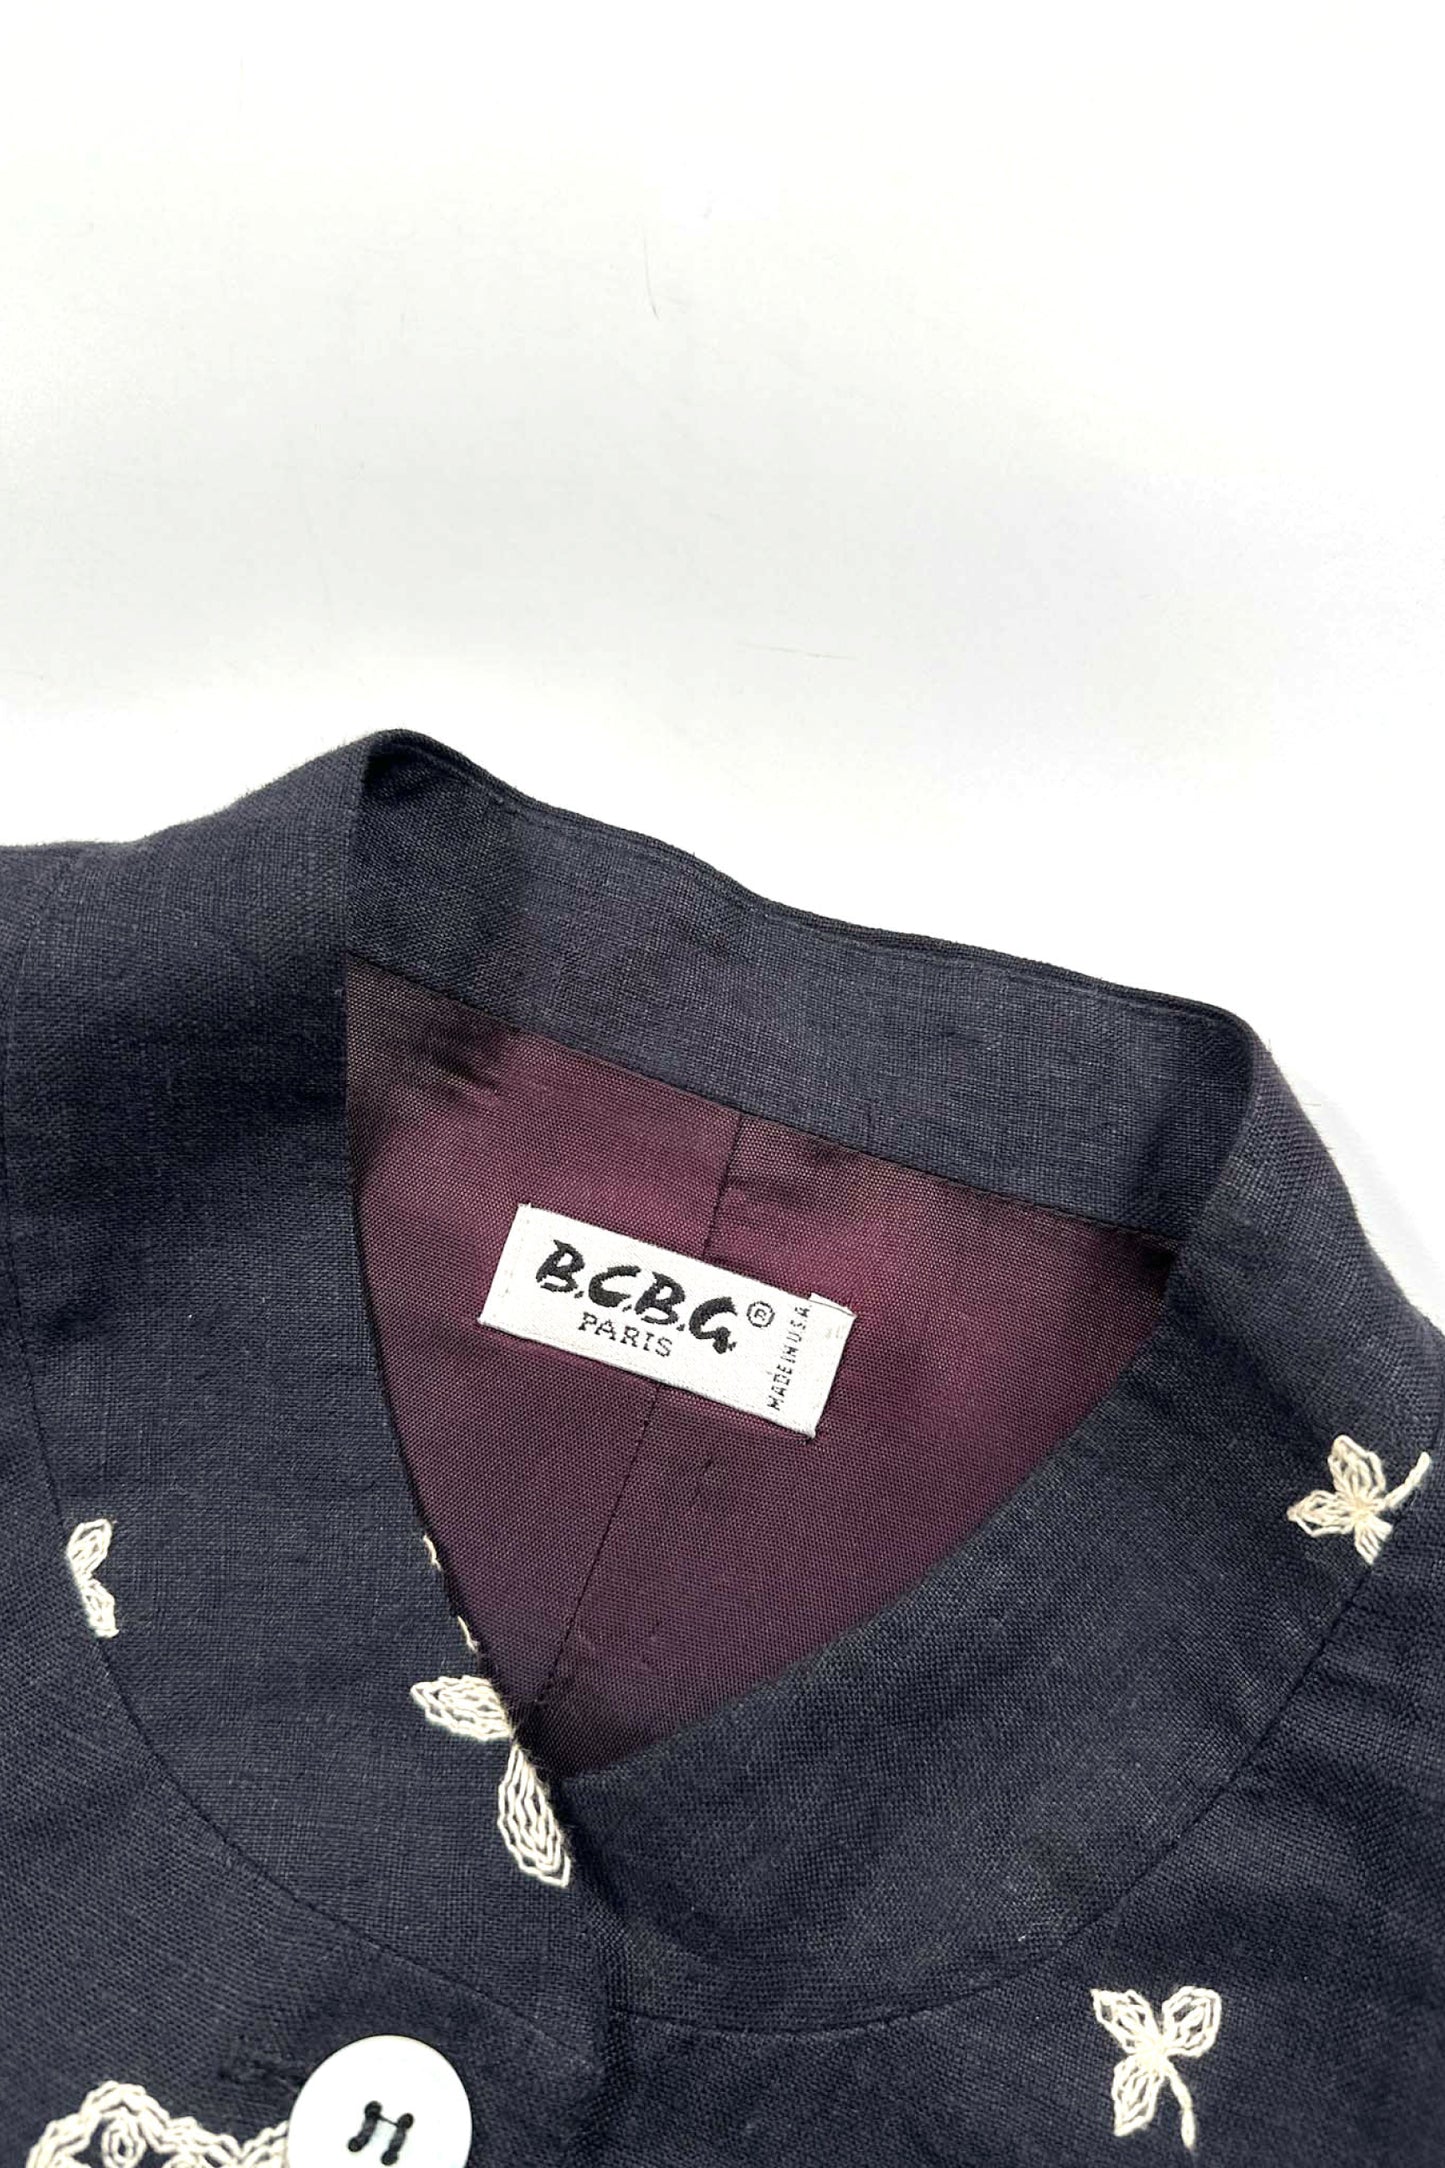 Made in USA B.C.B.G linen jacket